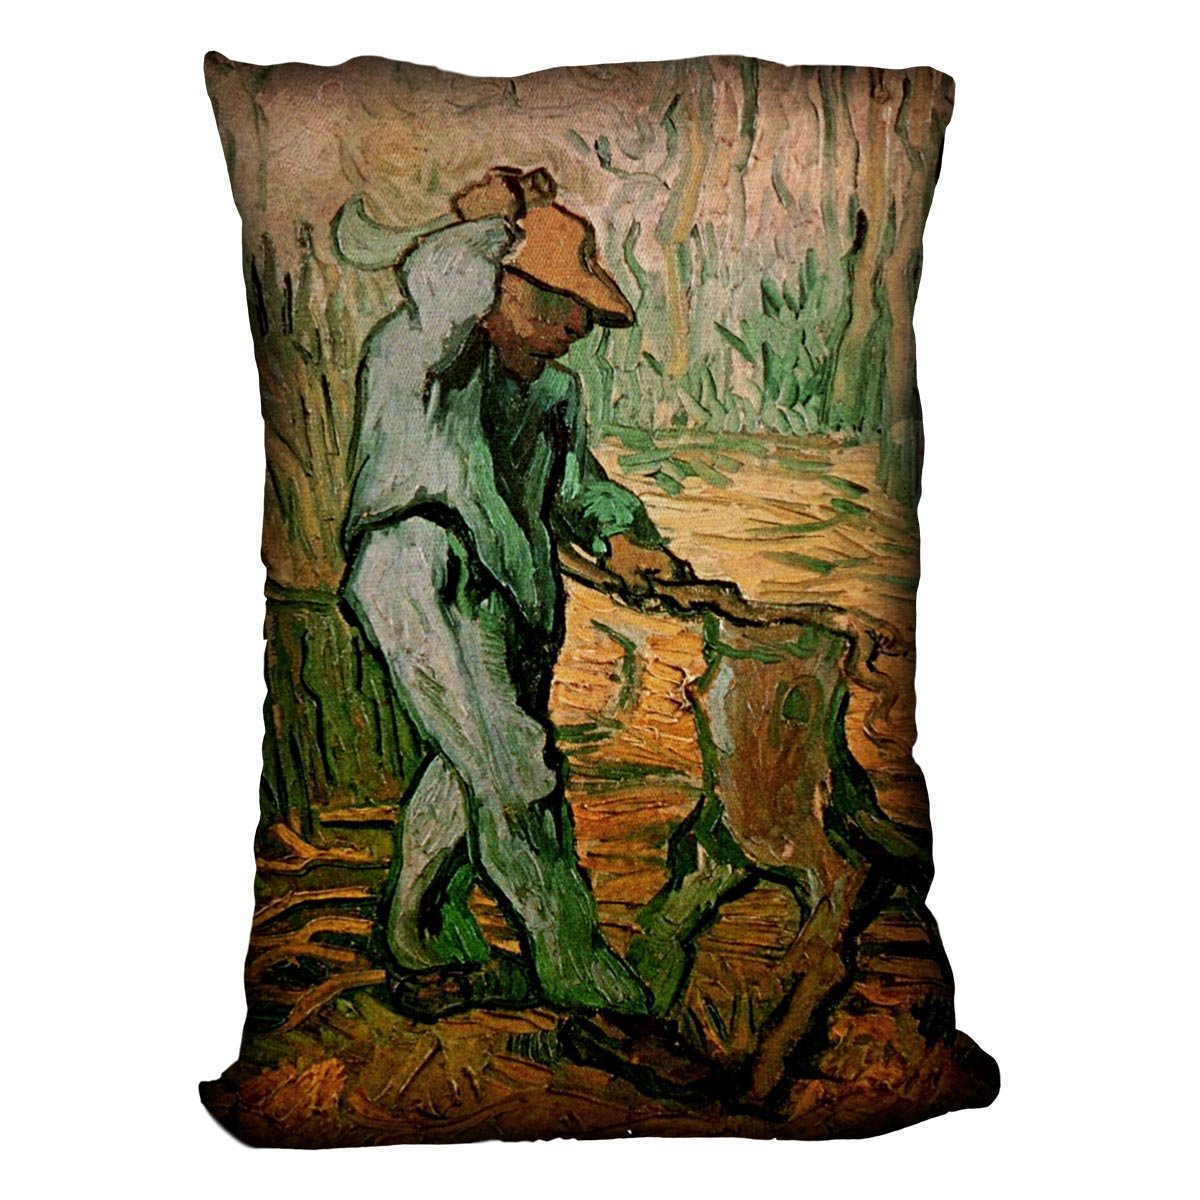 The Woodcutter after Millet by Van Gogh Throw Pillow